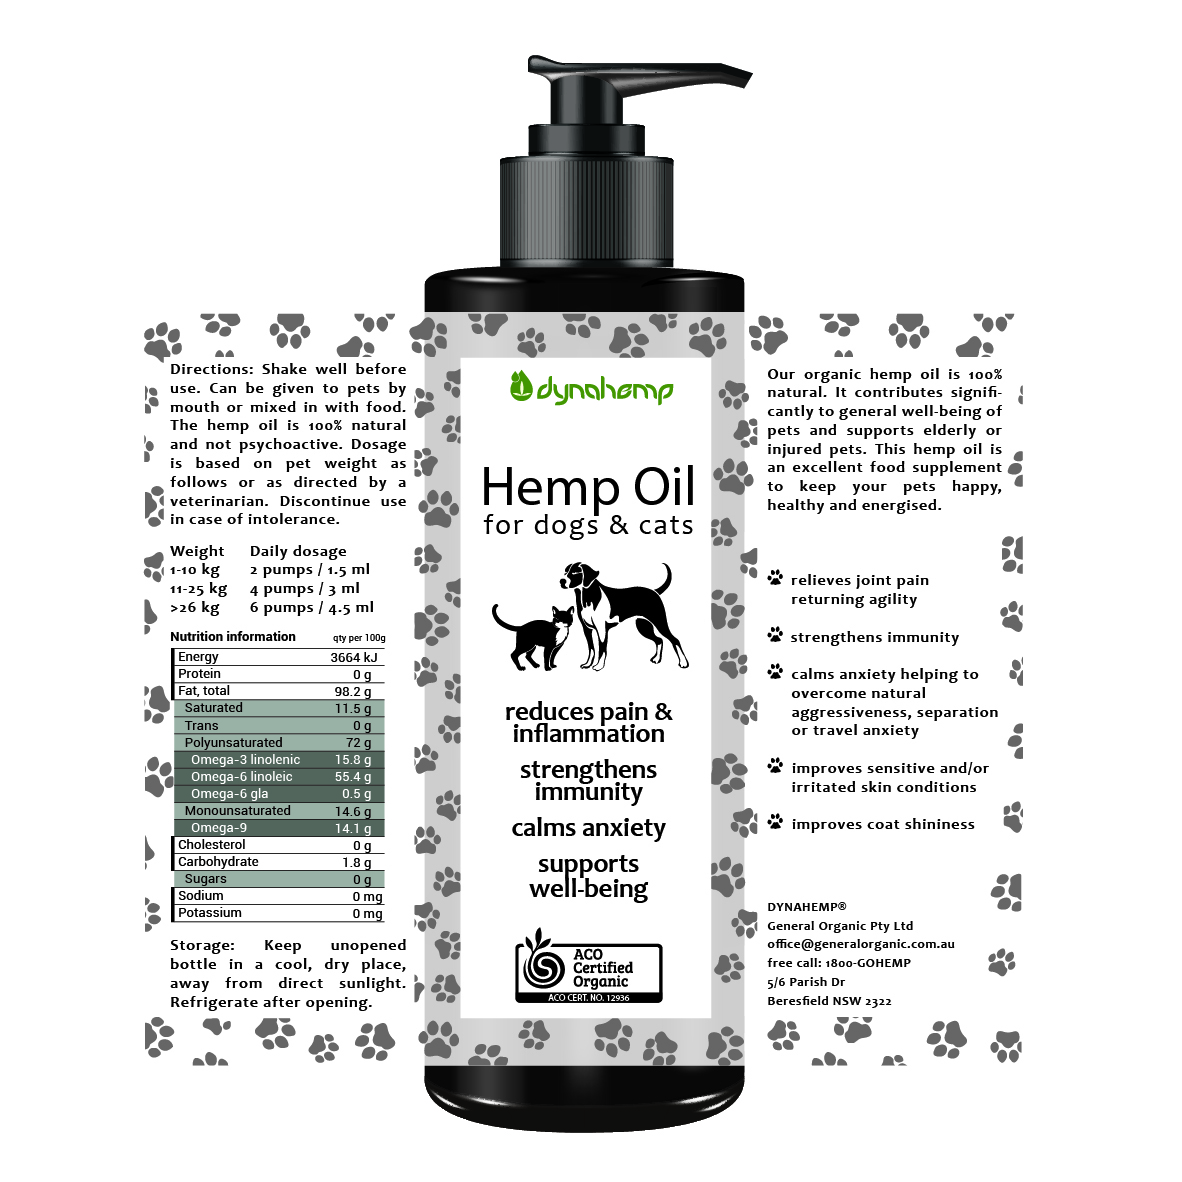 Hemp oil for dogs and cats